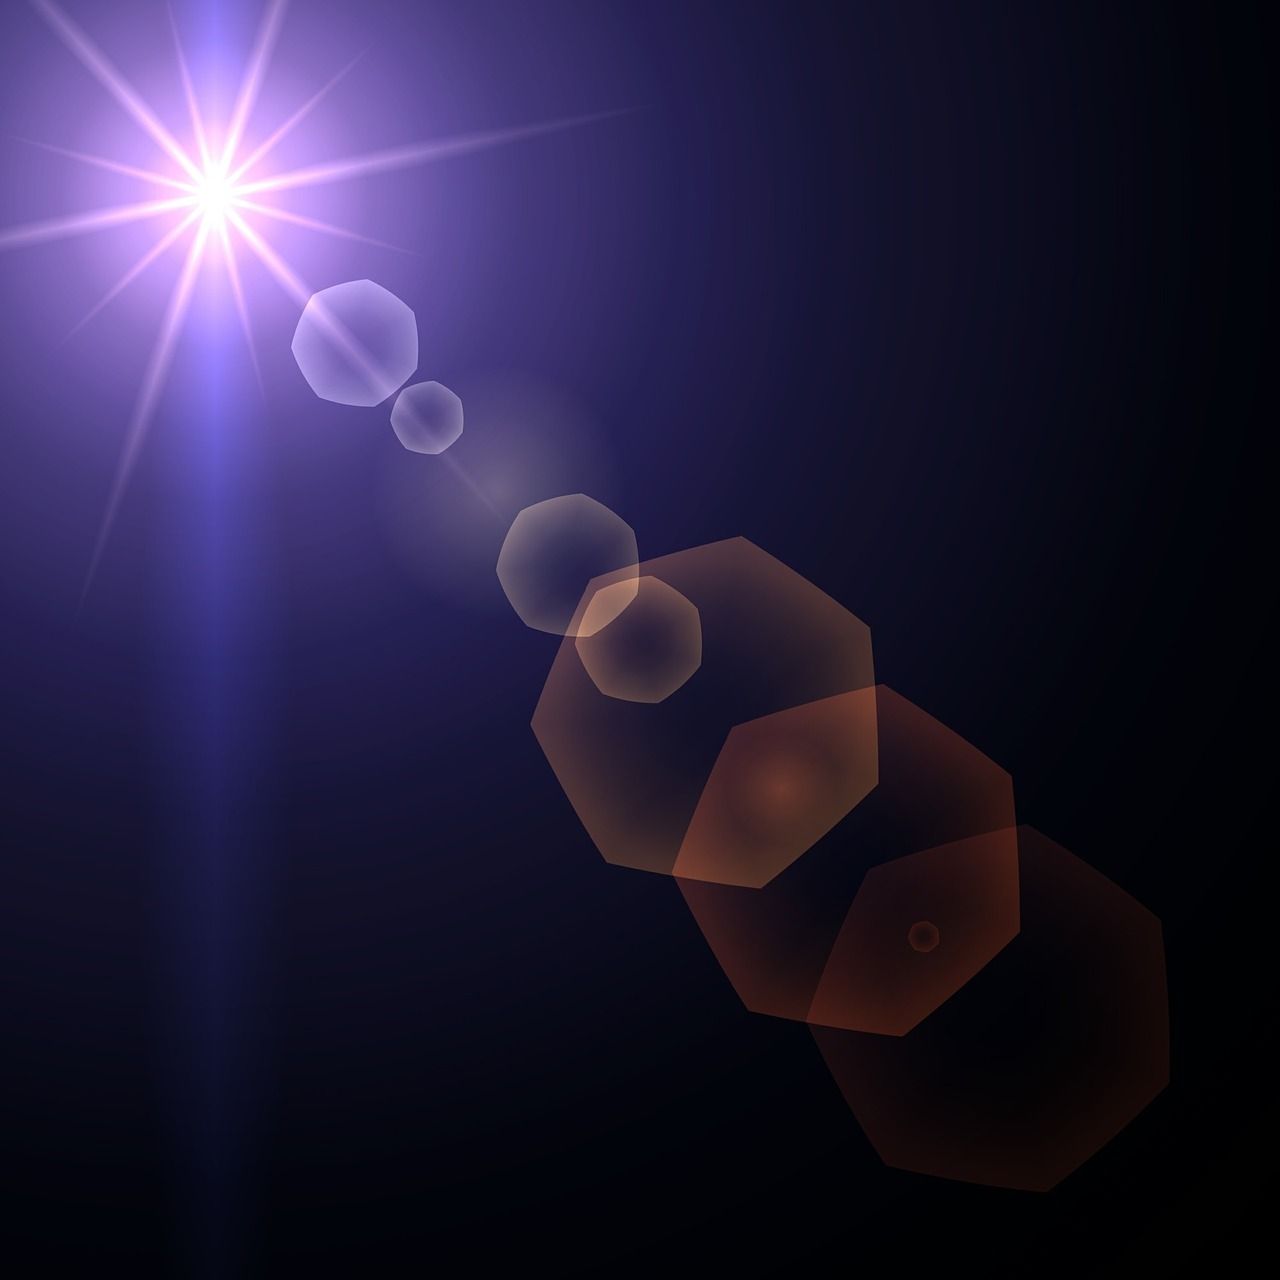 Image On Lens Flare Reflections Light Babal In